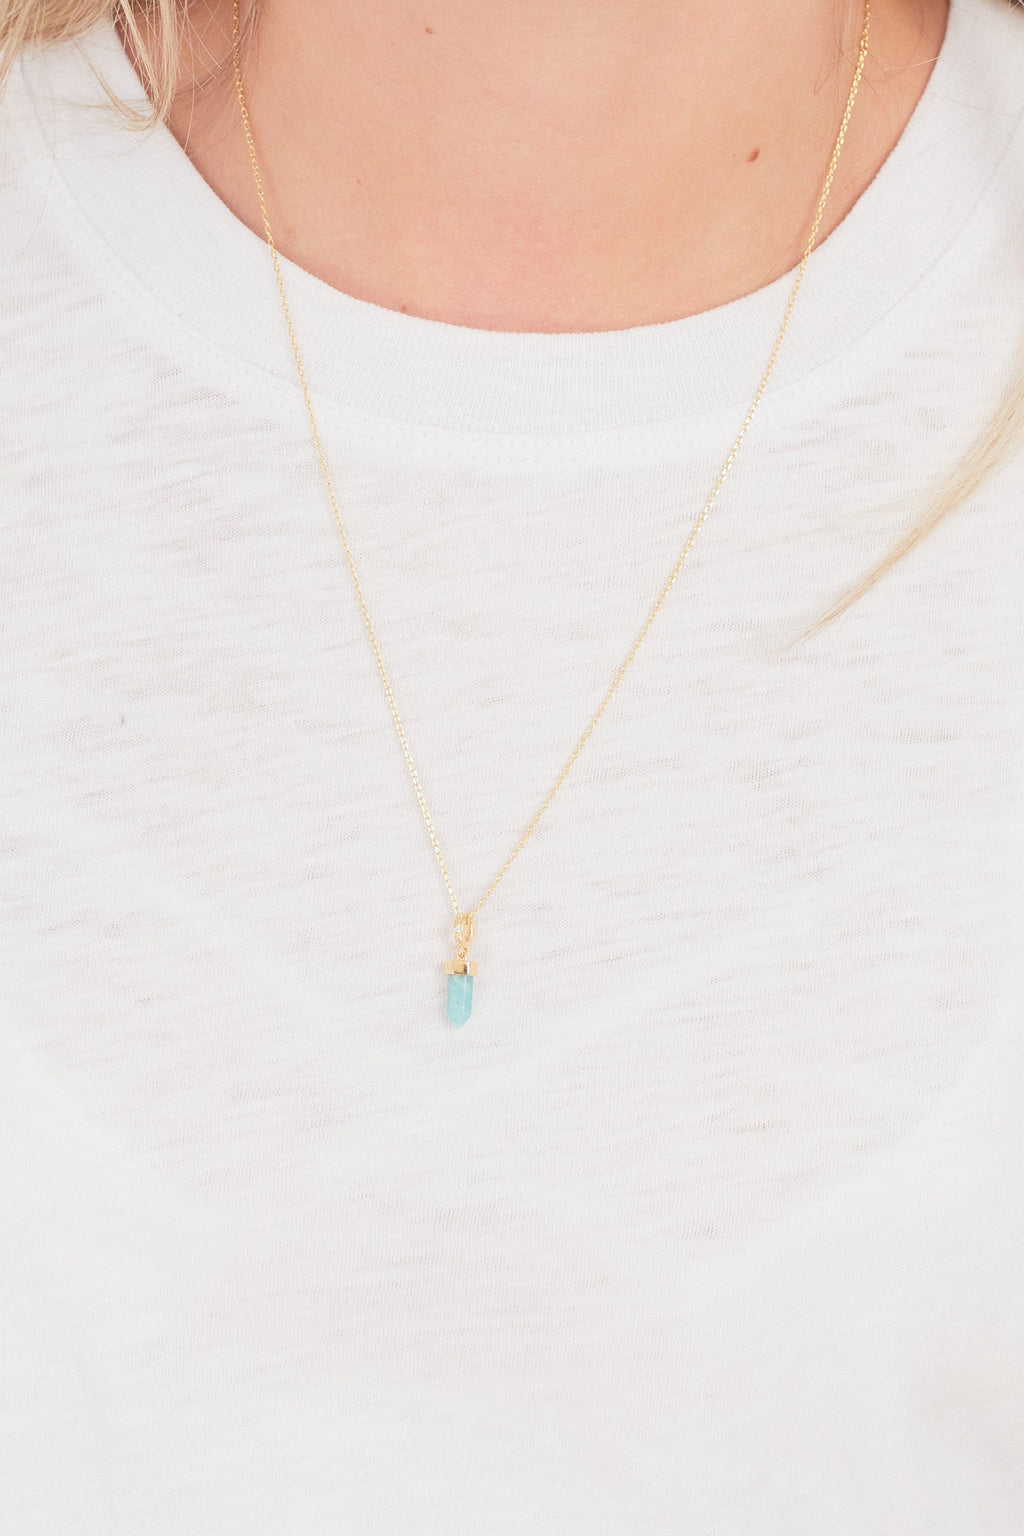 Intention Of Truth Amazonite Necklace - Driftwood Maui & Home By Driftwood